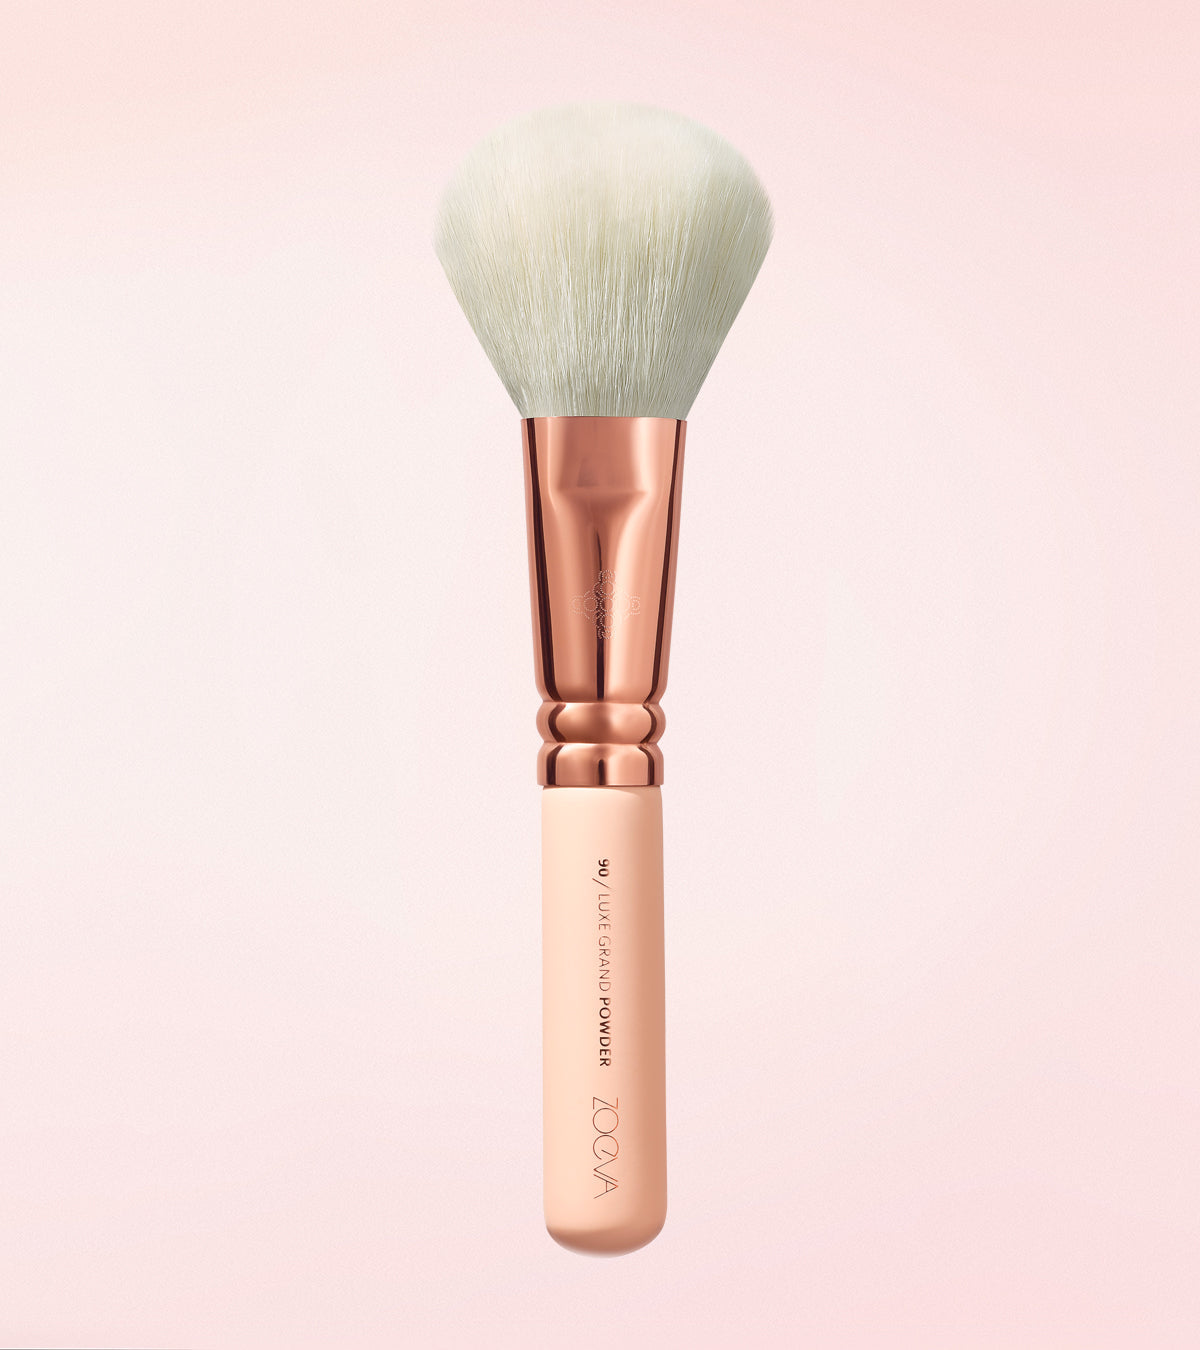 090 LUXE GRAND POWDER BRUSH (ROSE GOLDEN VOL. 2) Expanded Image 1